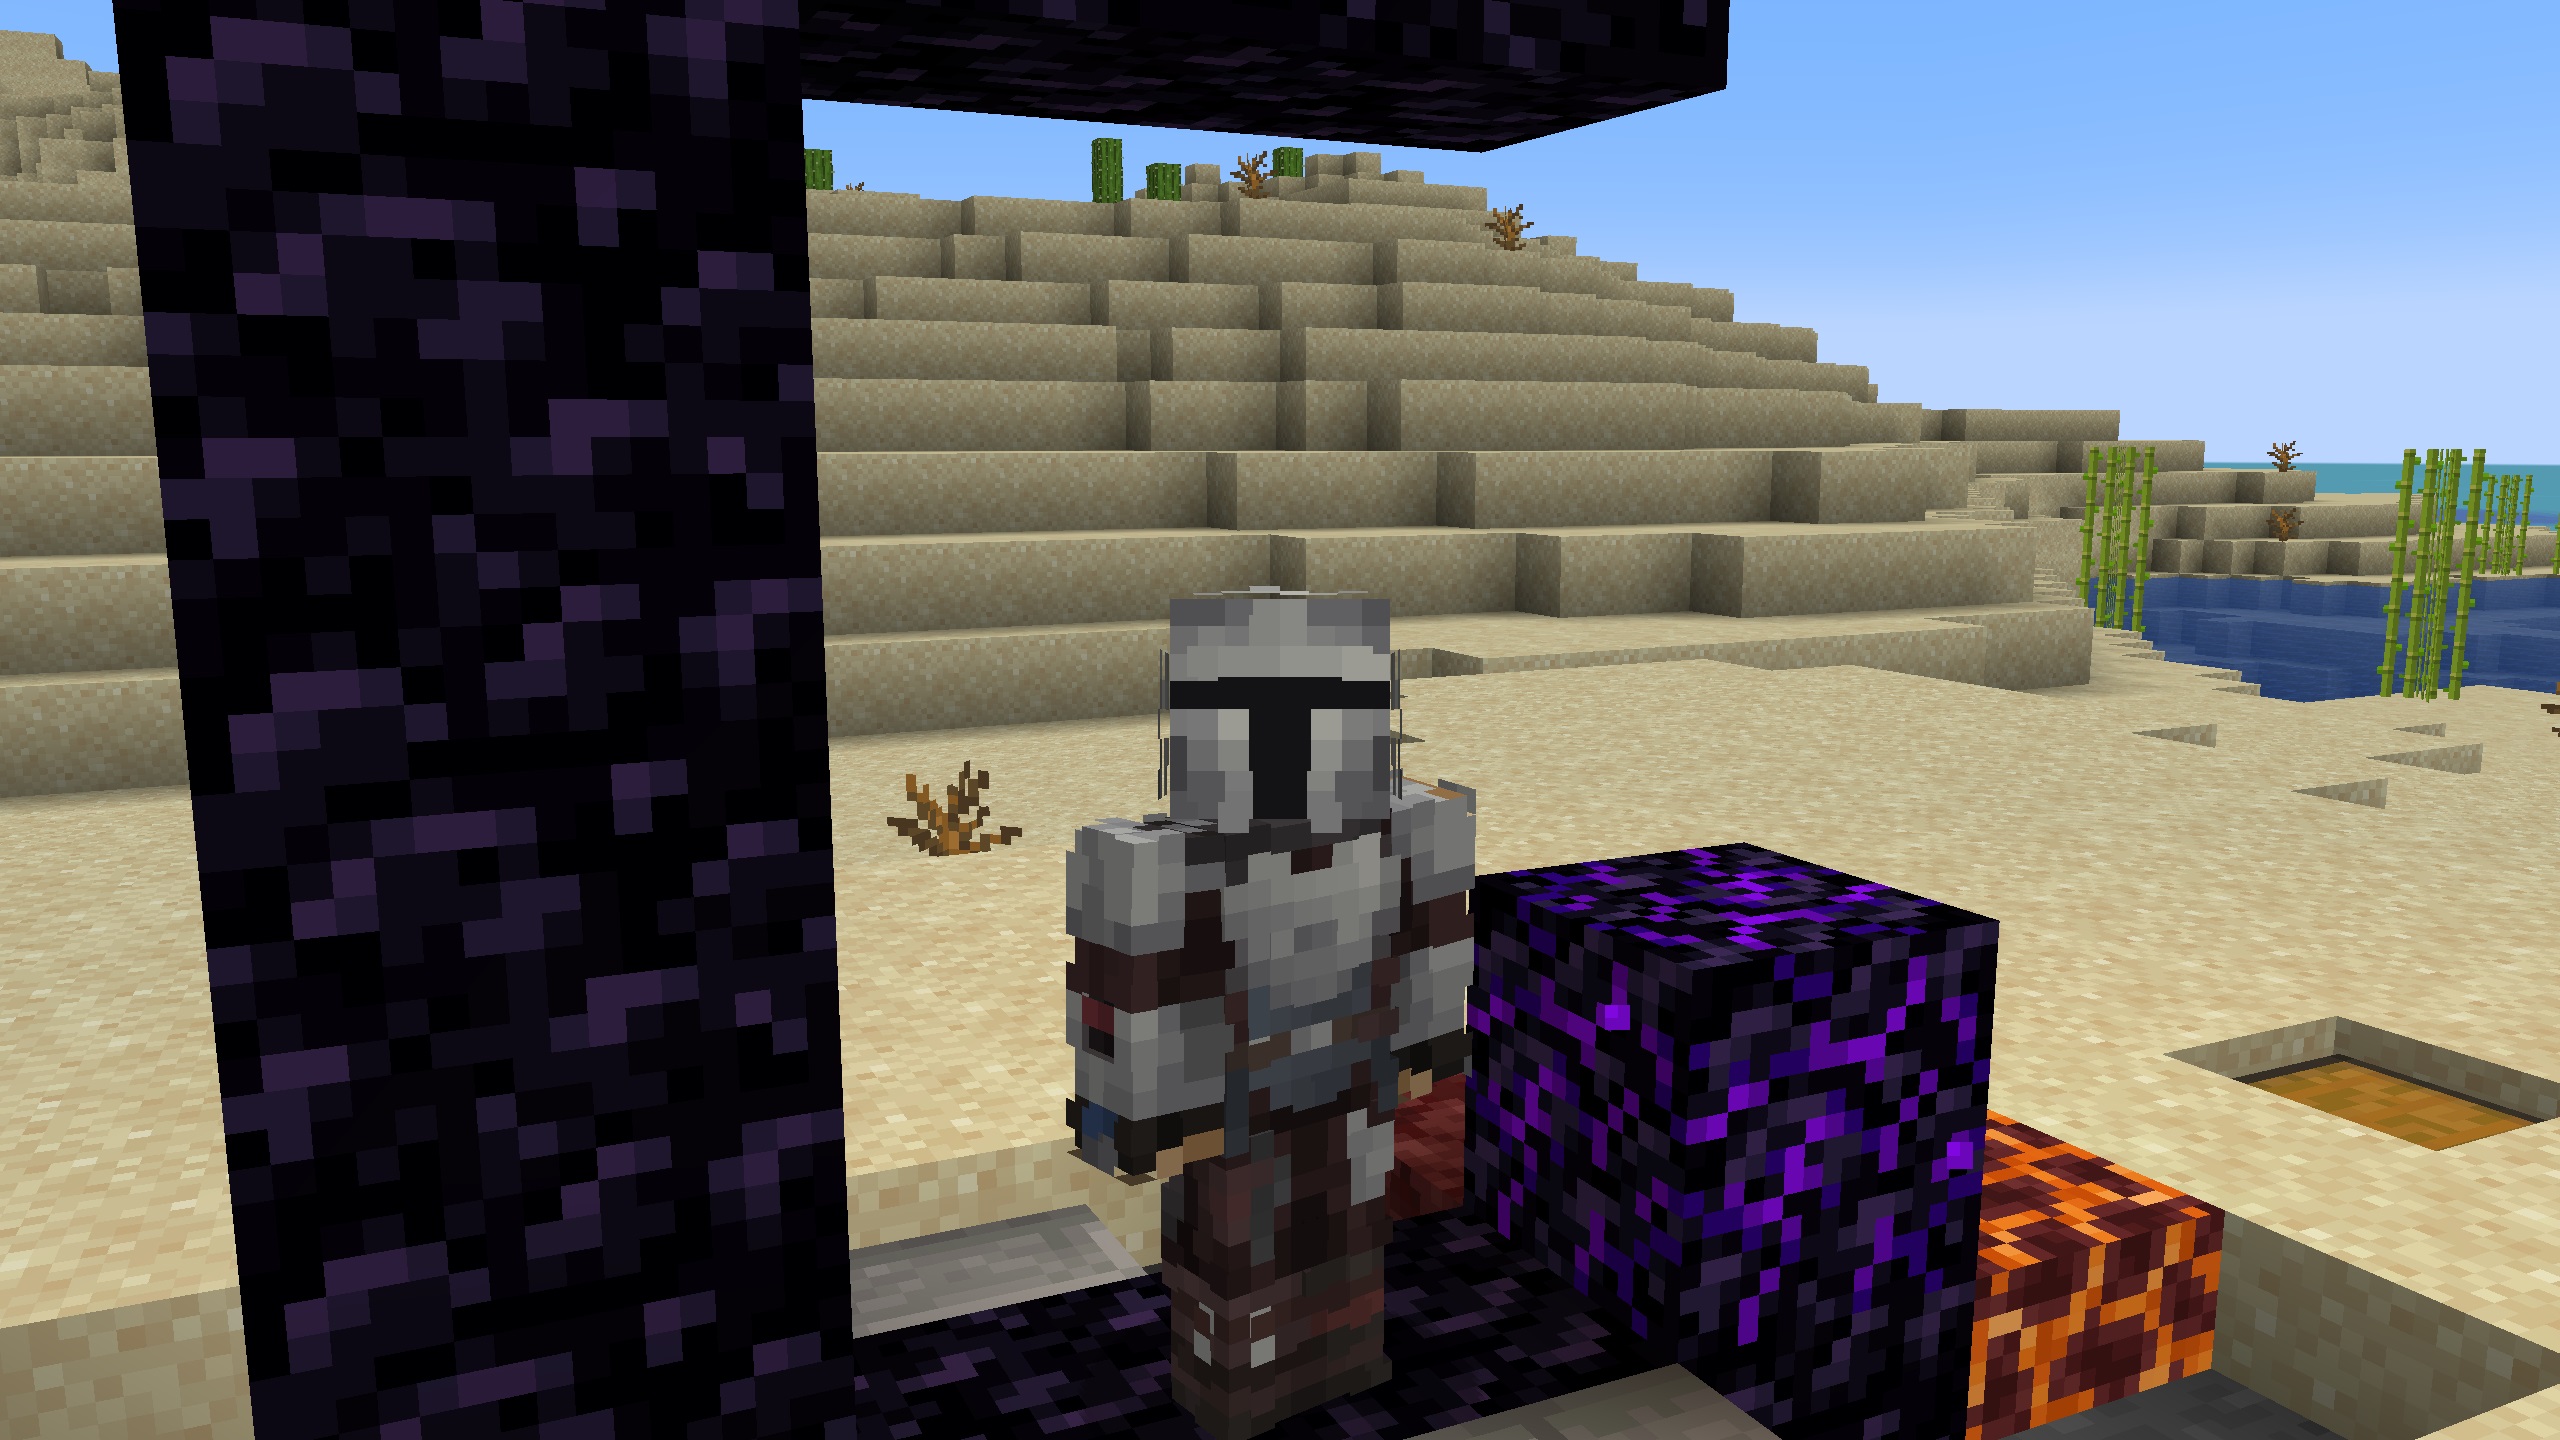 Minecraft skin - The Mandolorian with his grey helmet and armor